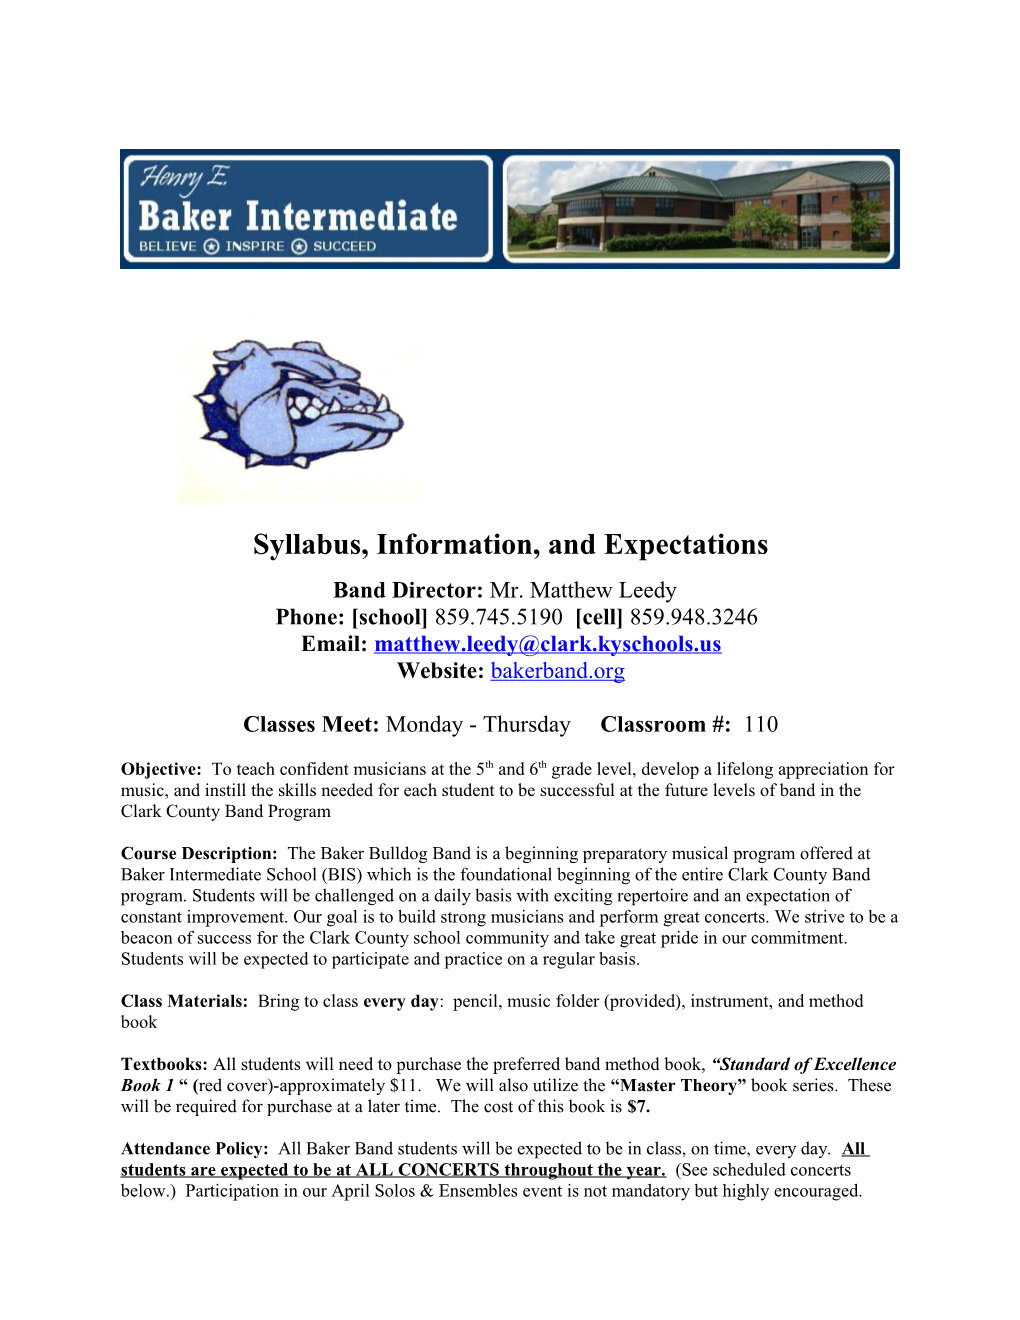 Syllabus, Information, and Expectations